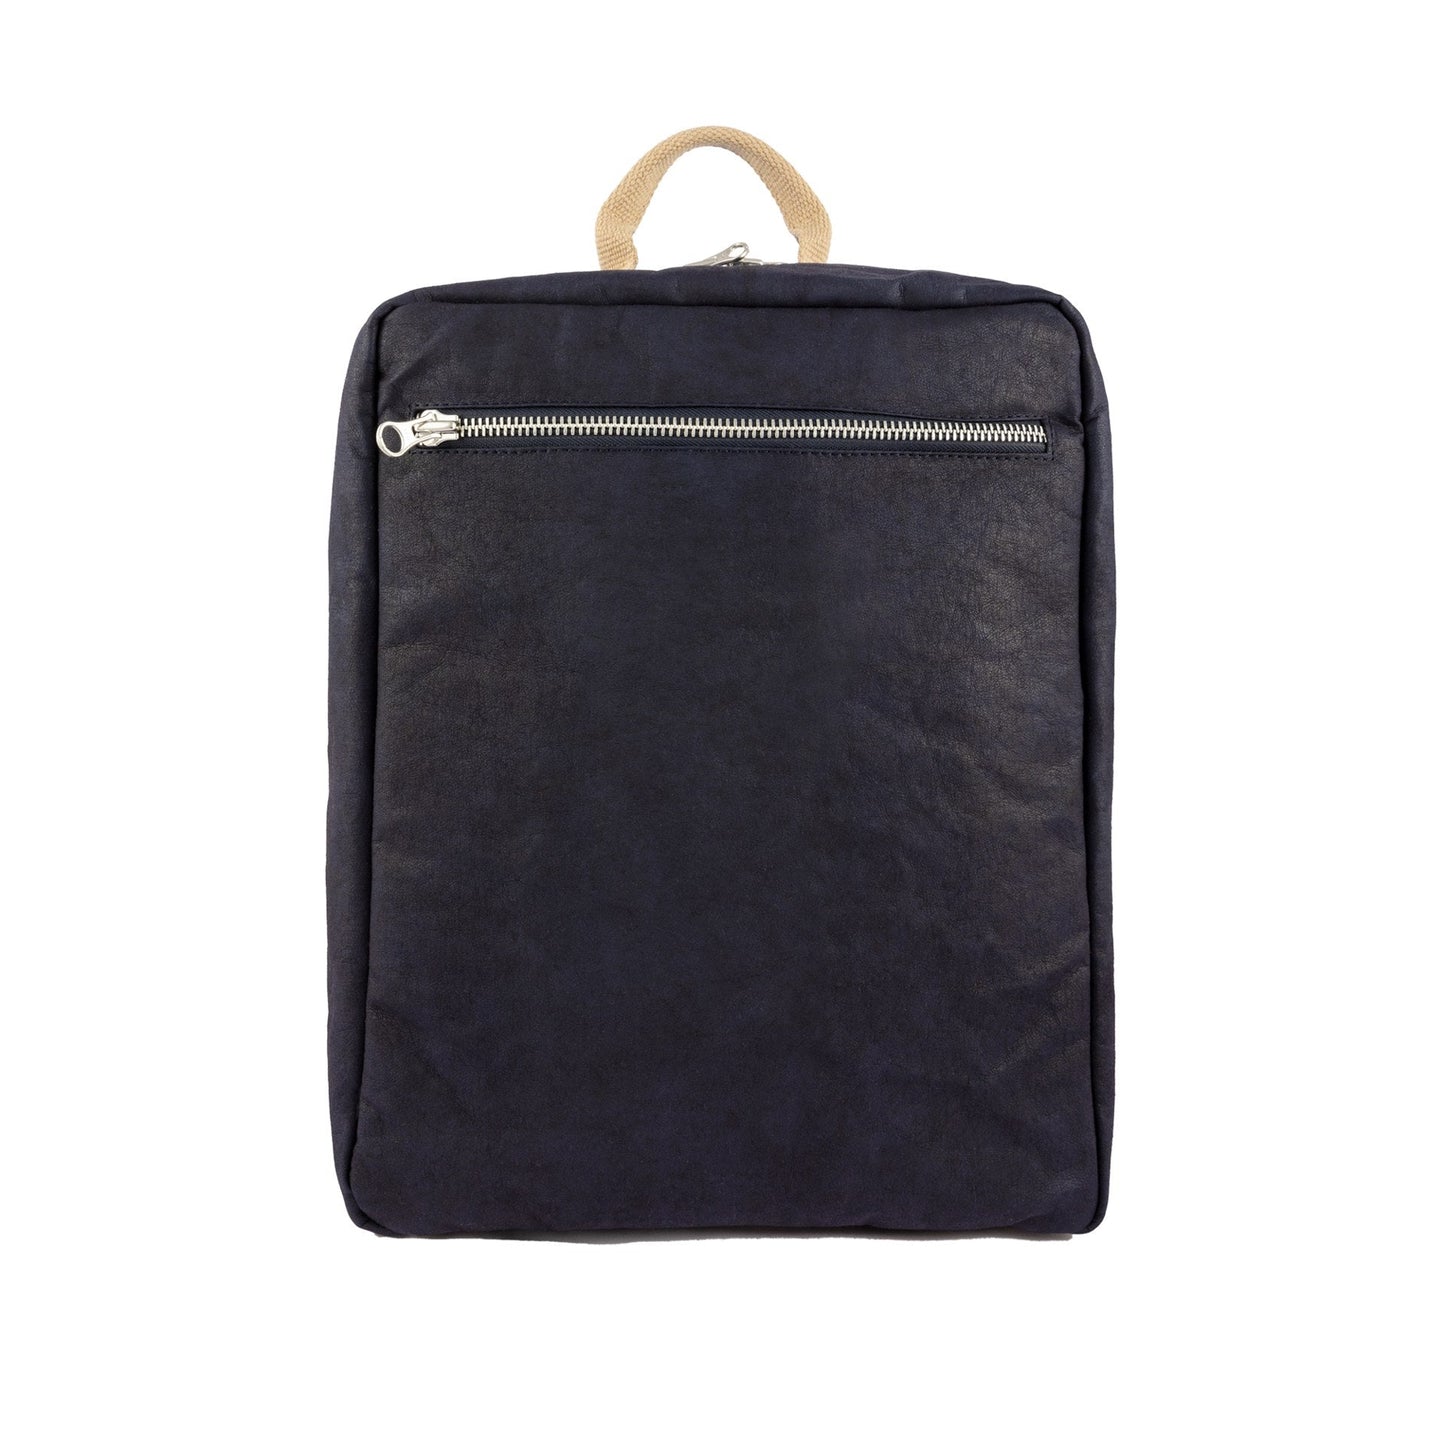 A square washable paper backpack is shown in a black colour. it has one external zip pocket and a top handle.